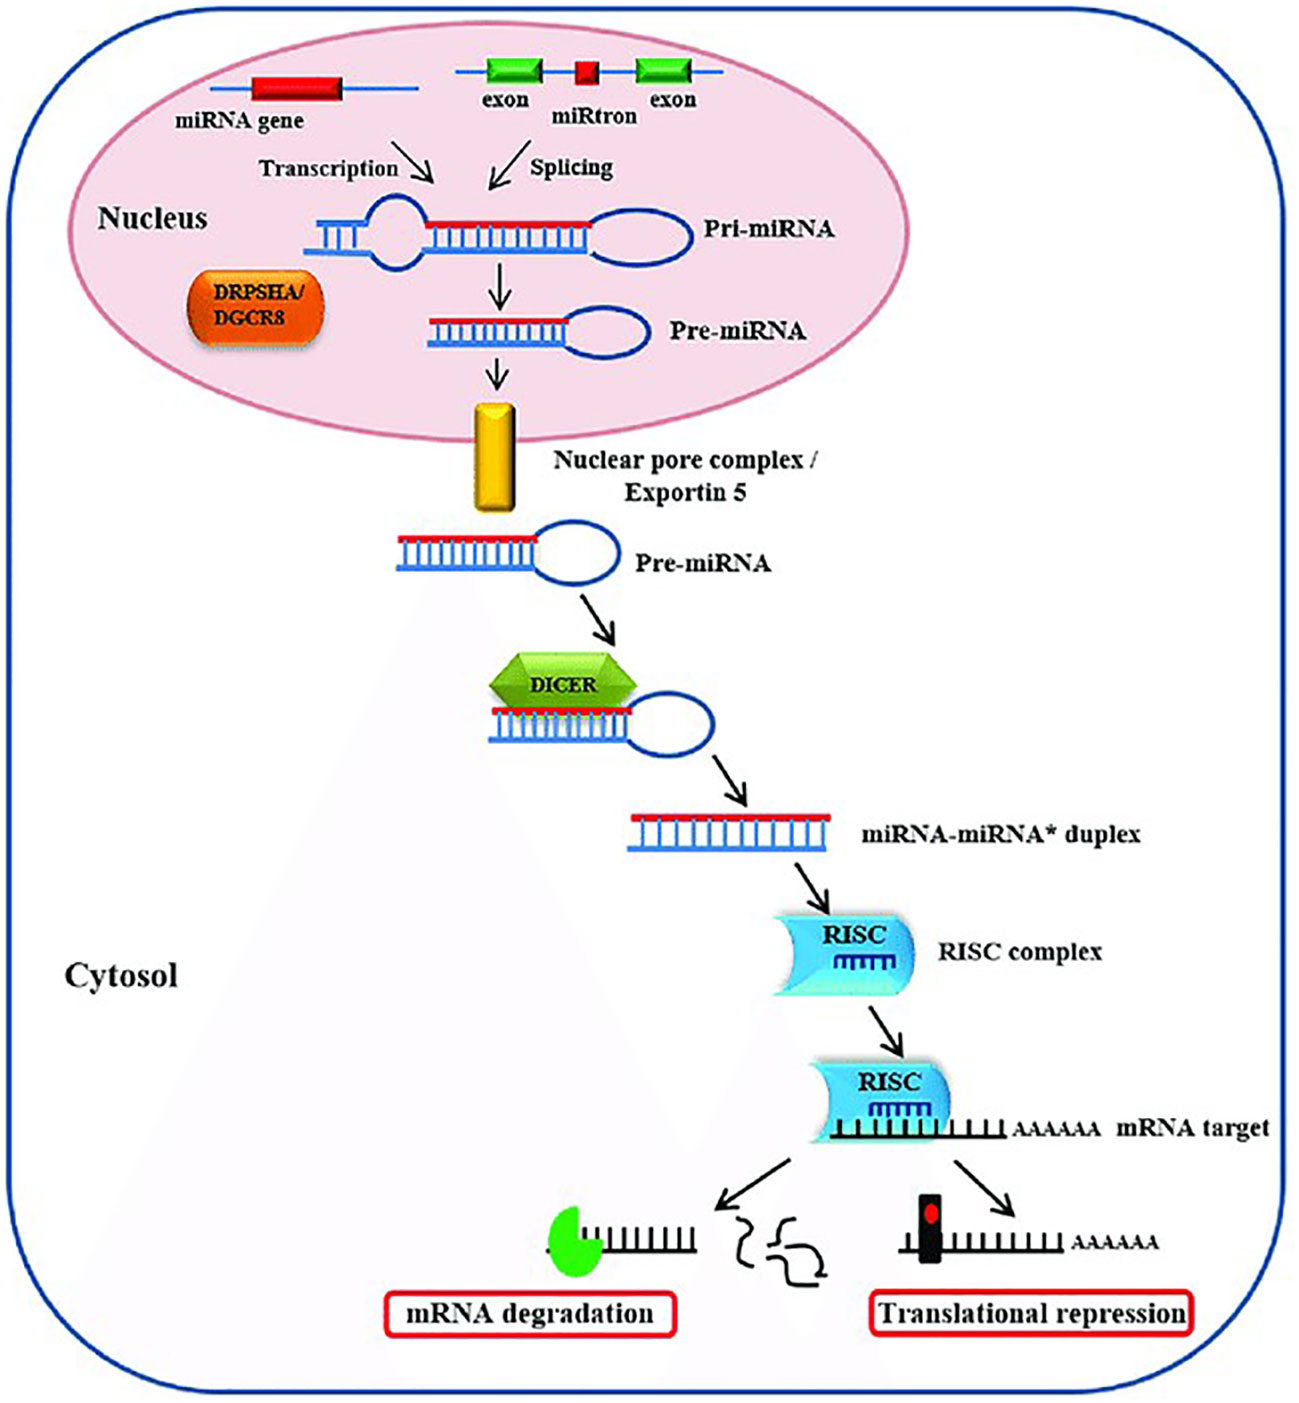 Frontiers | The role of miRNAs as biomarkers in breast cancer